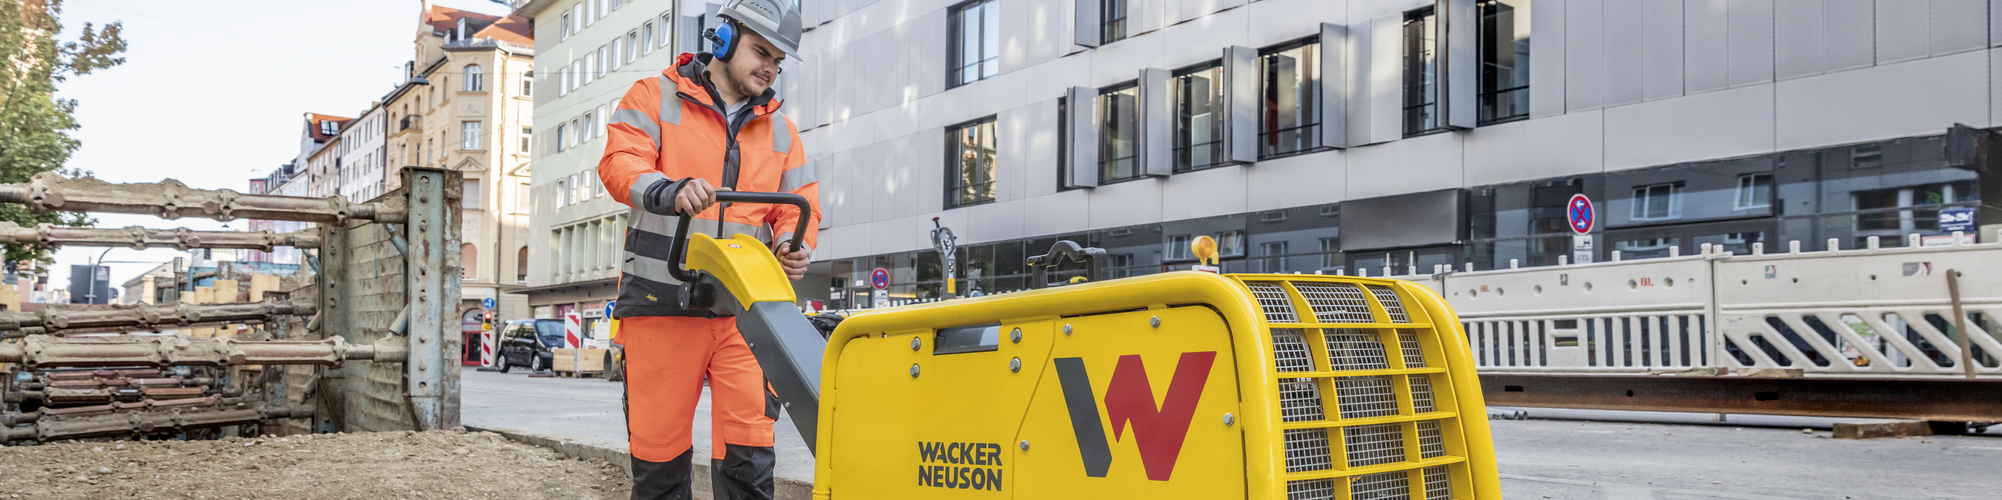 A Wacker Neuson vibratory plate in action on a construction site in the city.